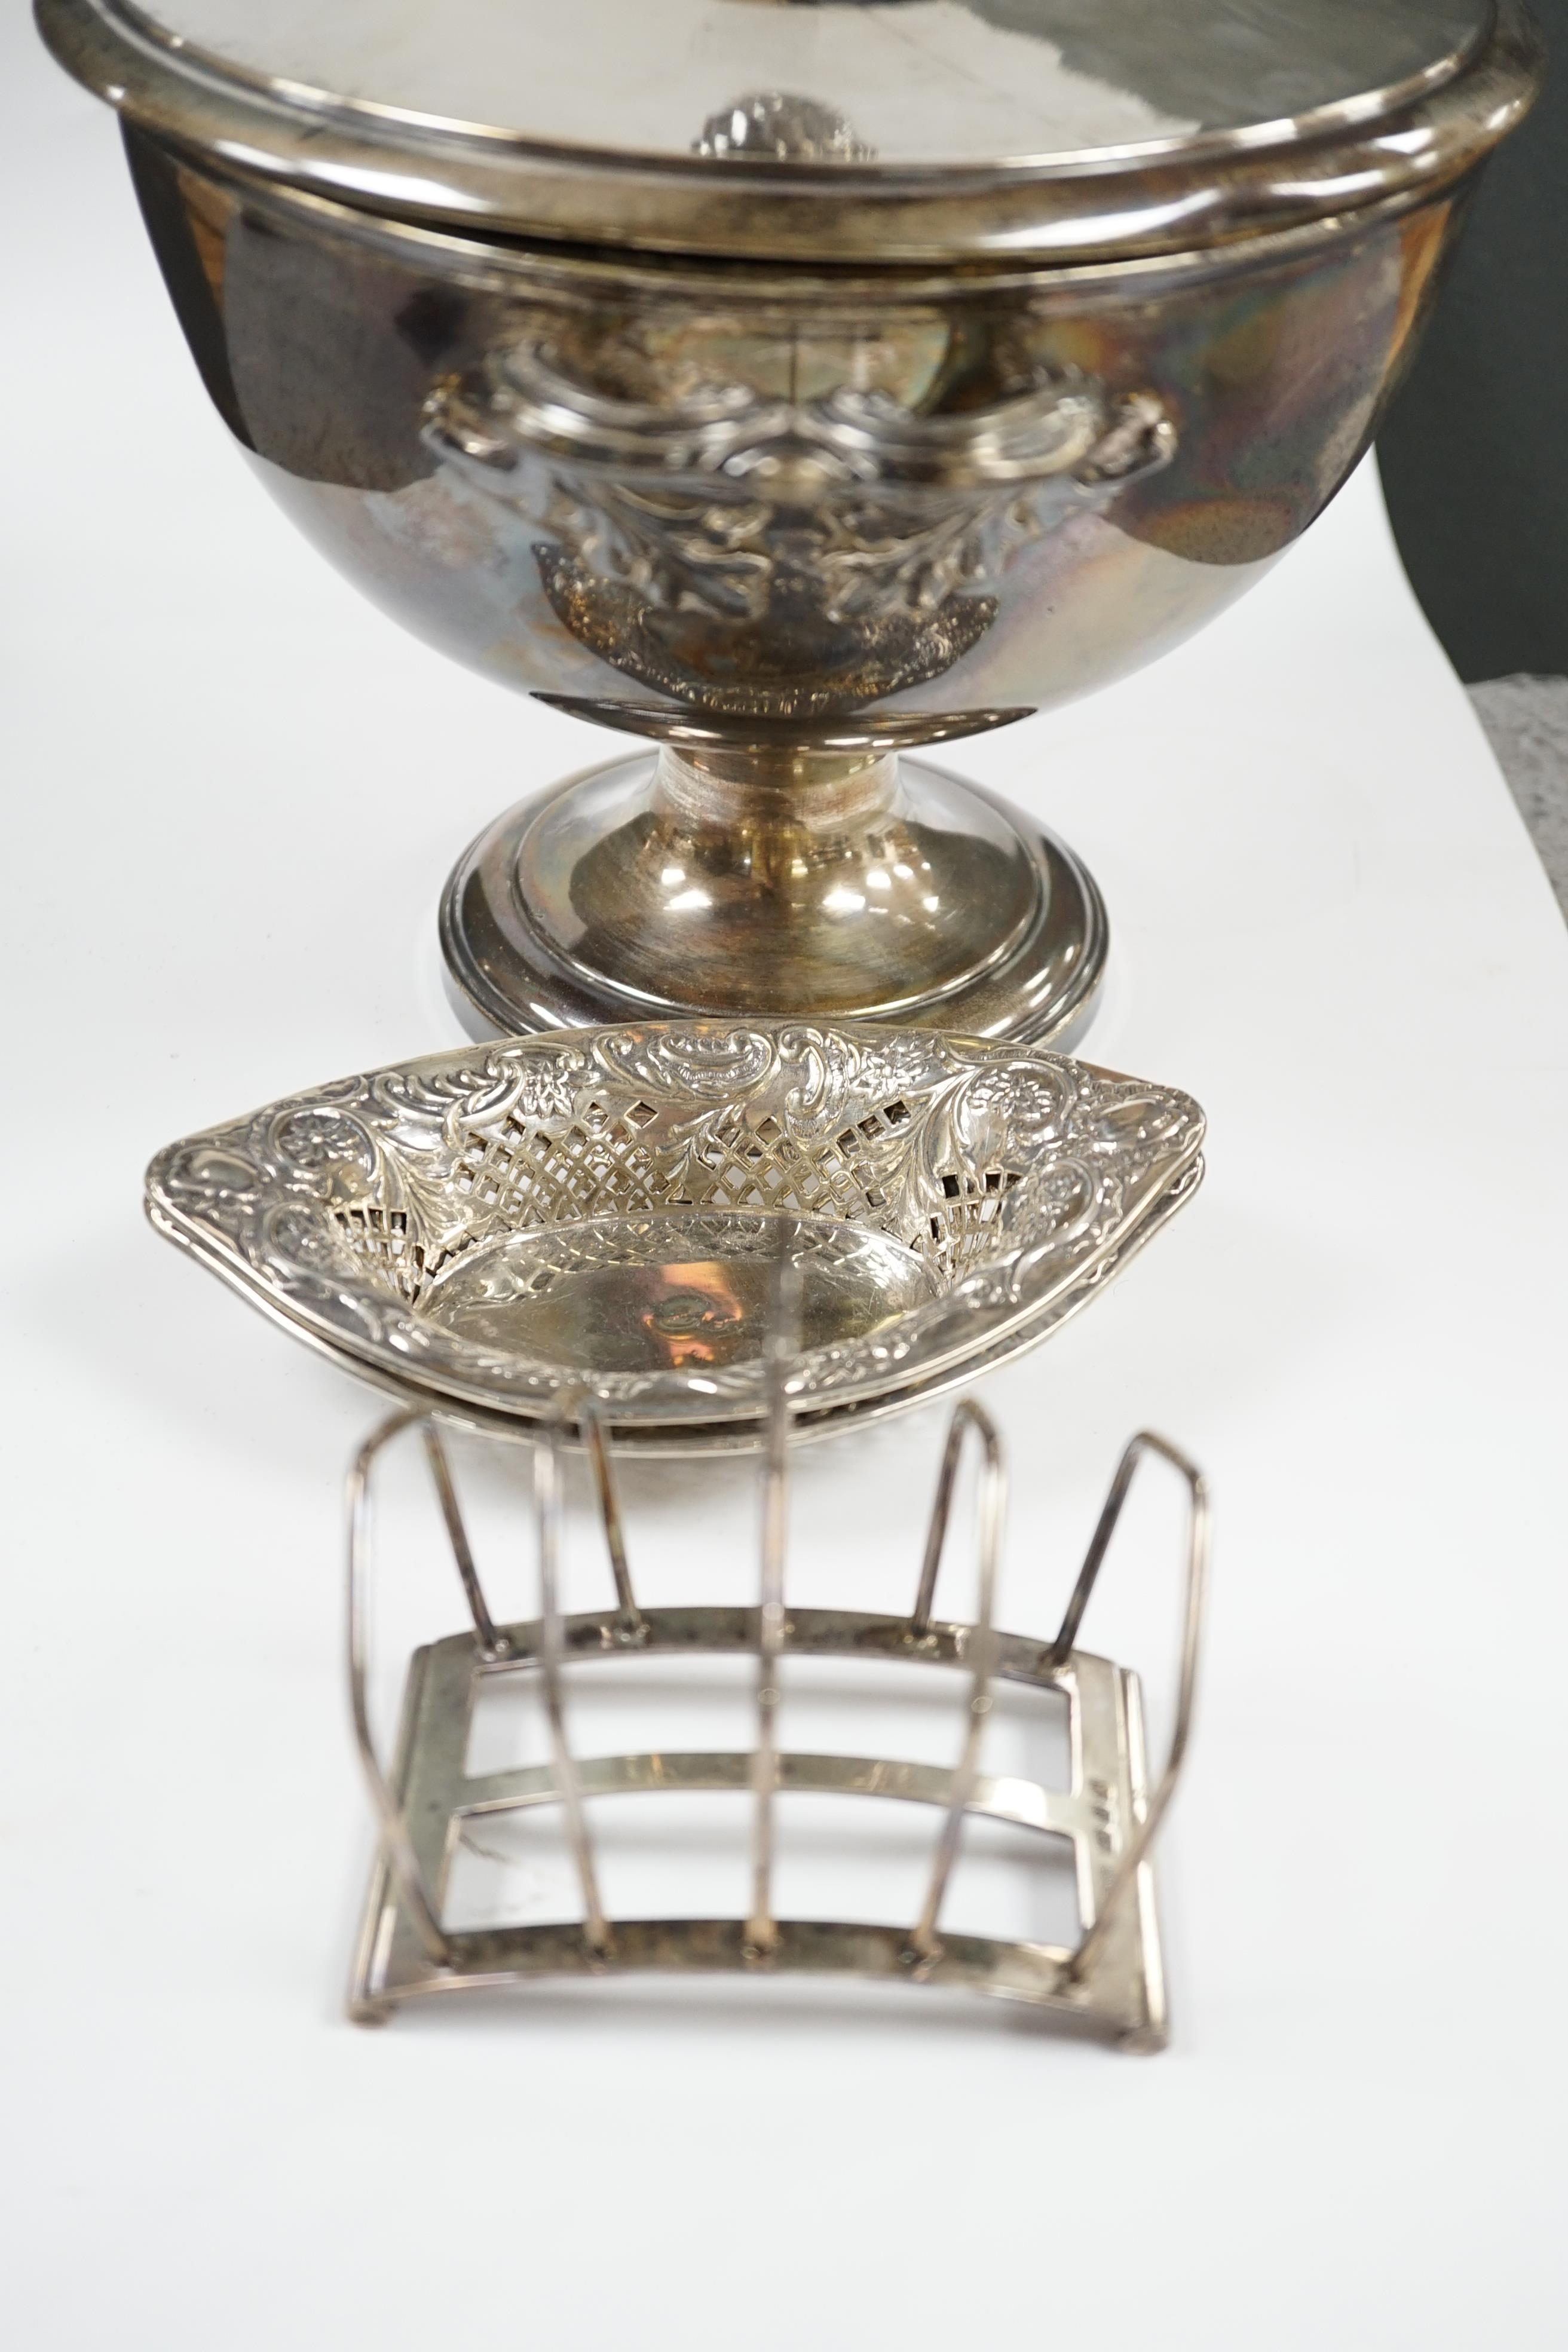 A pair of late Victorian pierced silver navette shaped bonbon dishes, 15.4cm, a silver five bar toast rack and a plated punch bowl and cover. Condition - poor to fair